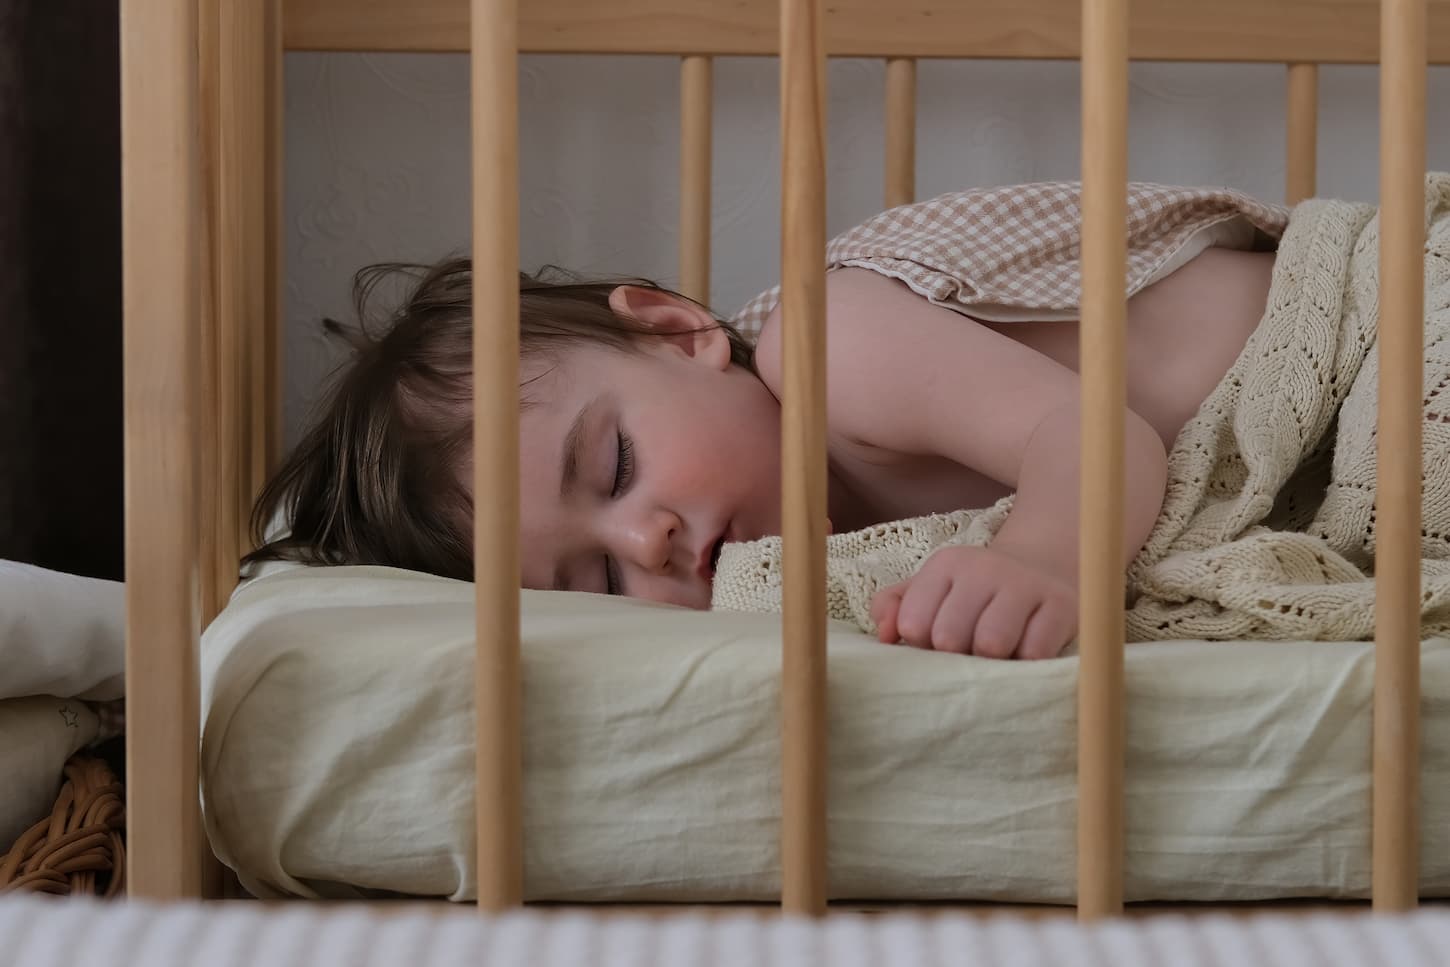 An image of a baby boy sleeping sweetly in a crib.